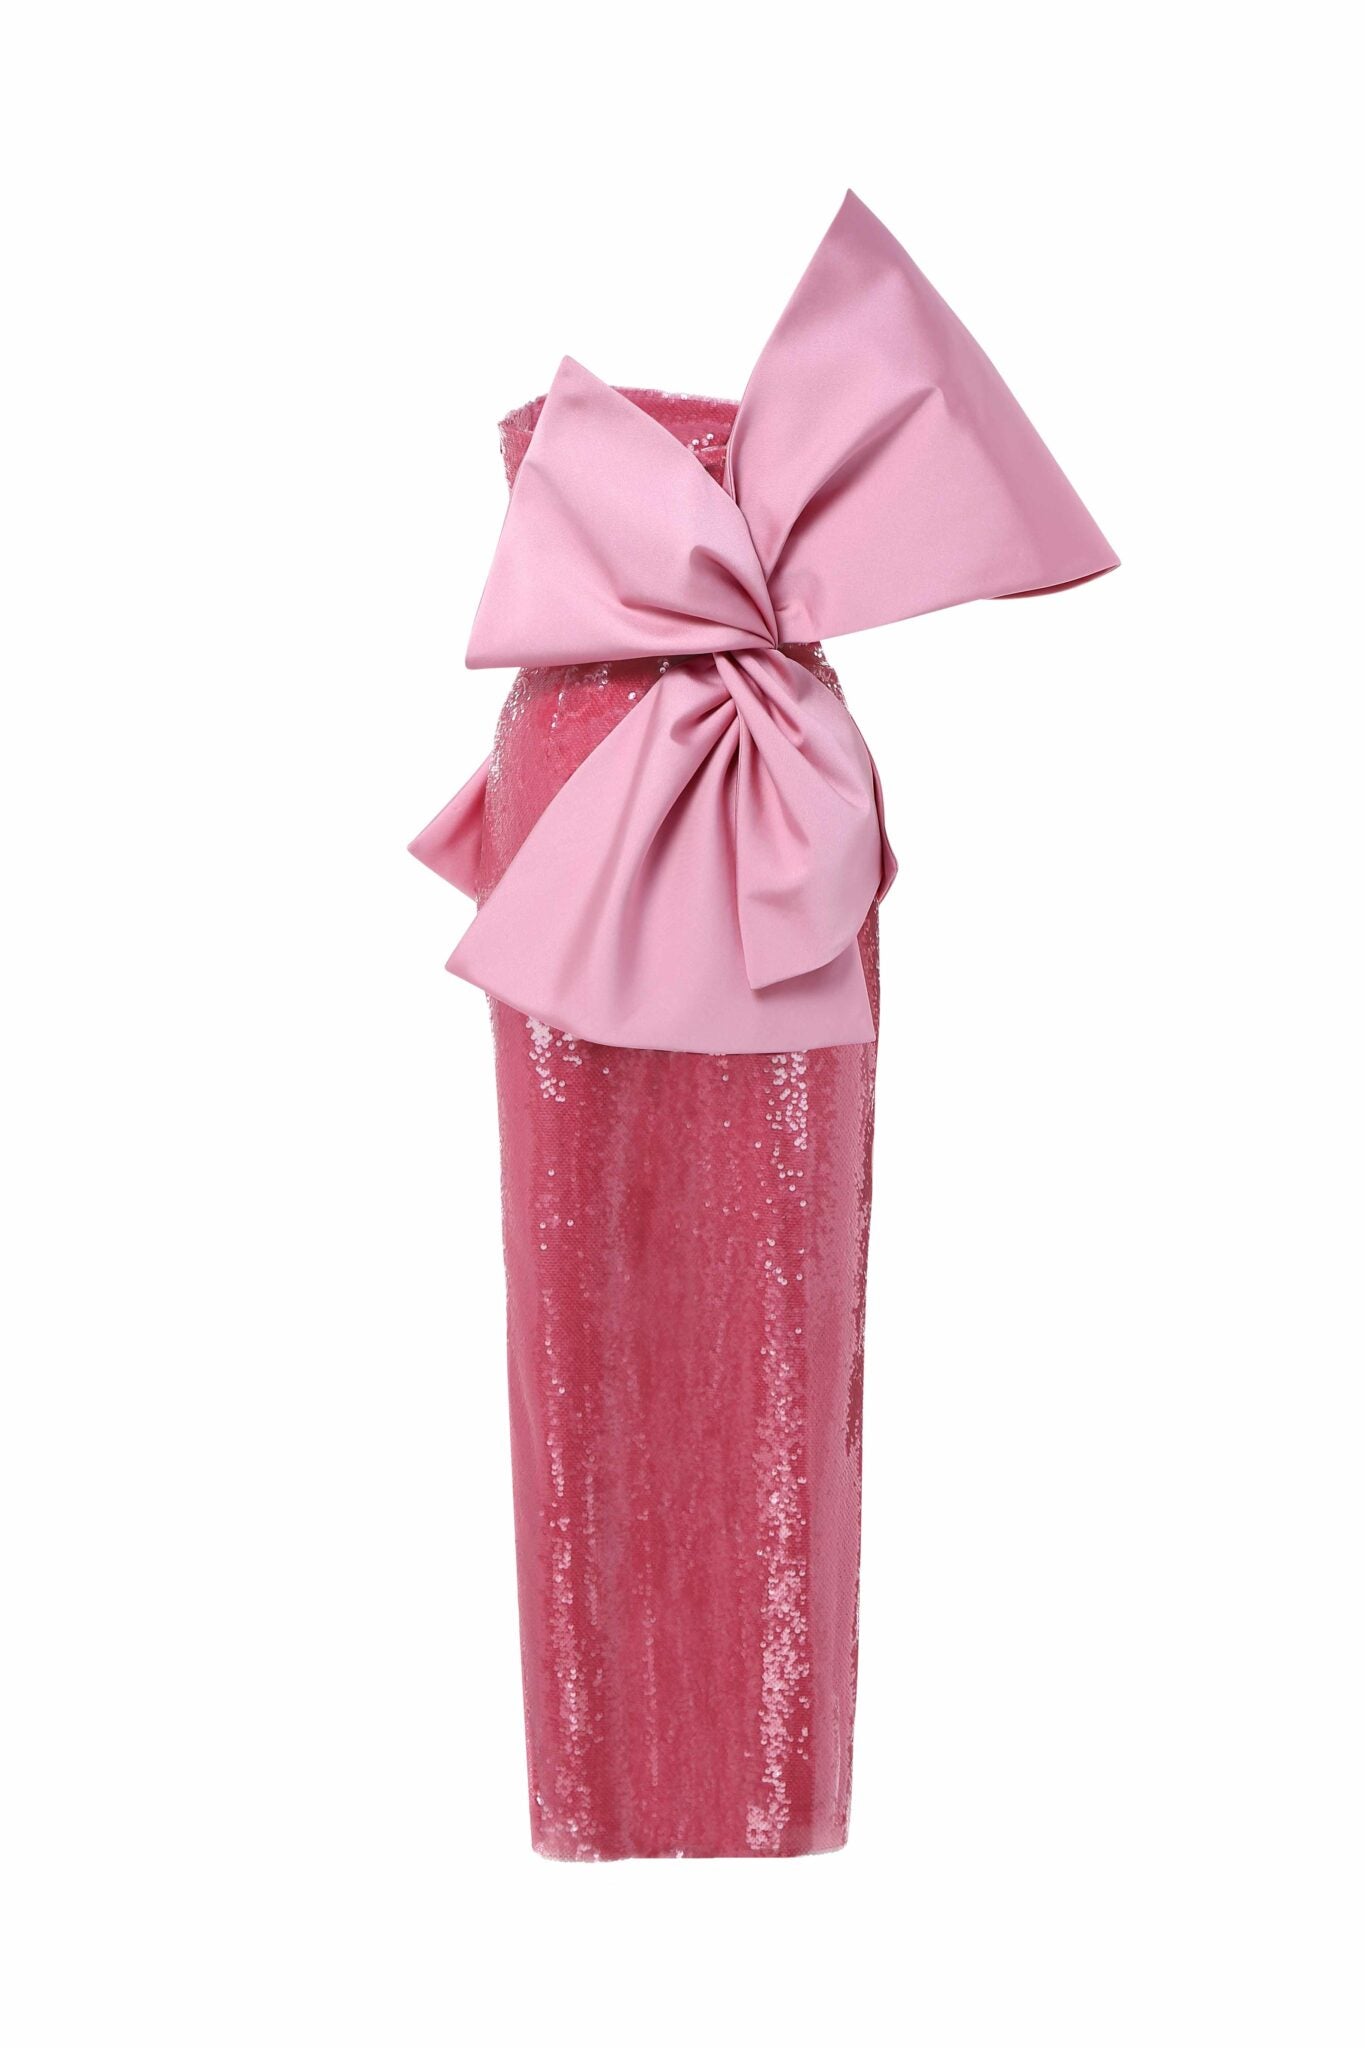 Shimmery strapless dress with oversize satin bow